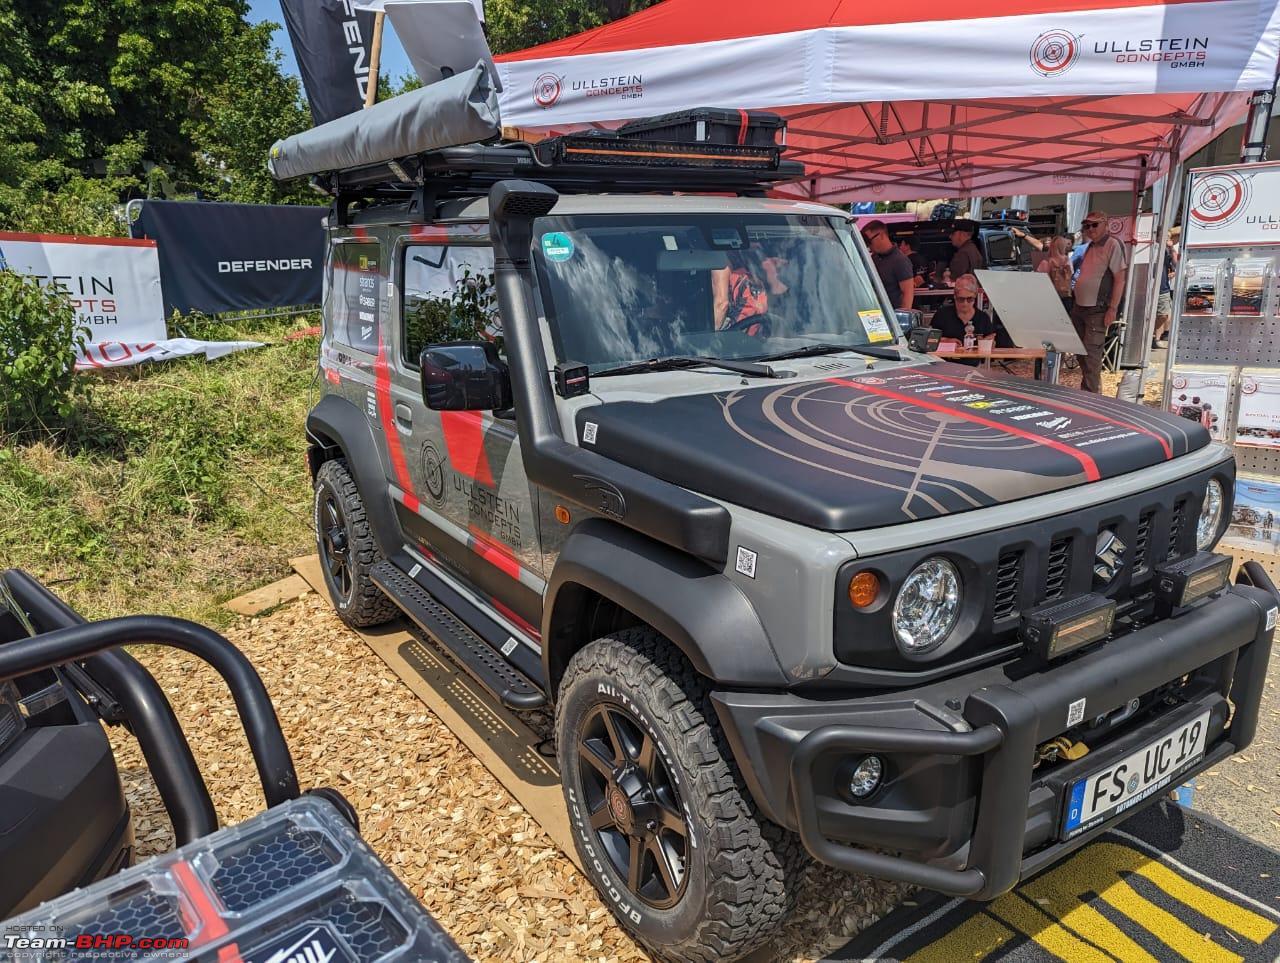 In Pictures: Visiting a 4x4 & overlanding event in Germany